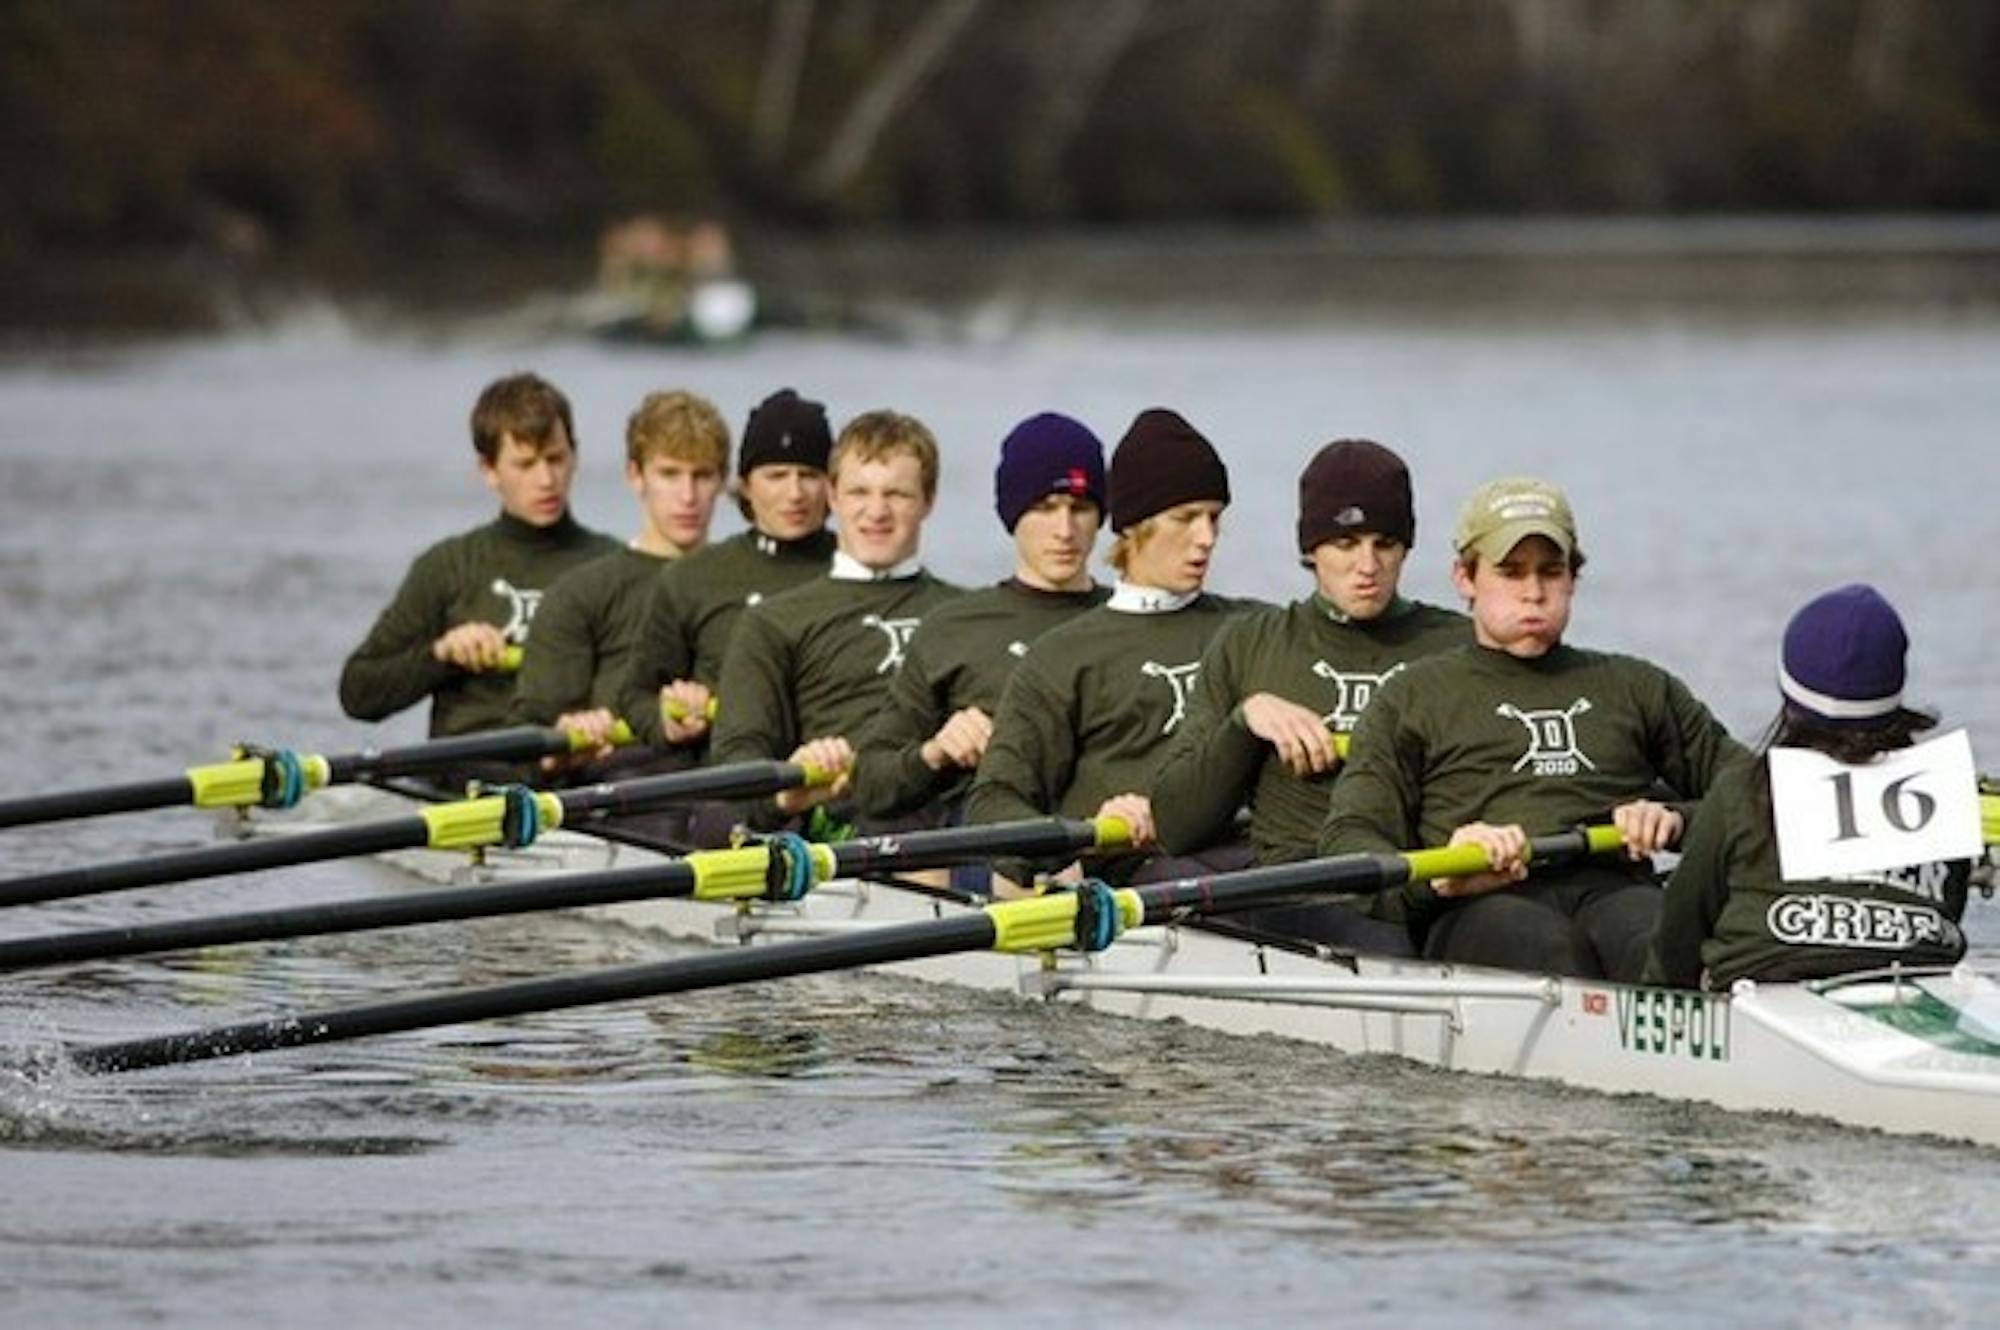 The freshman men's lightweight rowers finished eighth and ninth in their races Sunday at the Belly of the Carnegie regatta in Princeton, N.J.